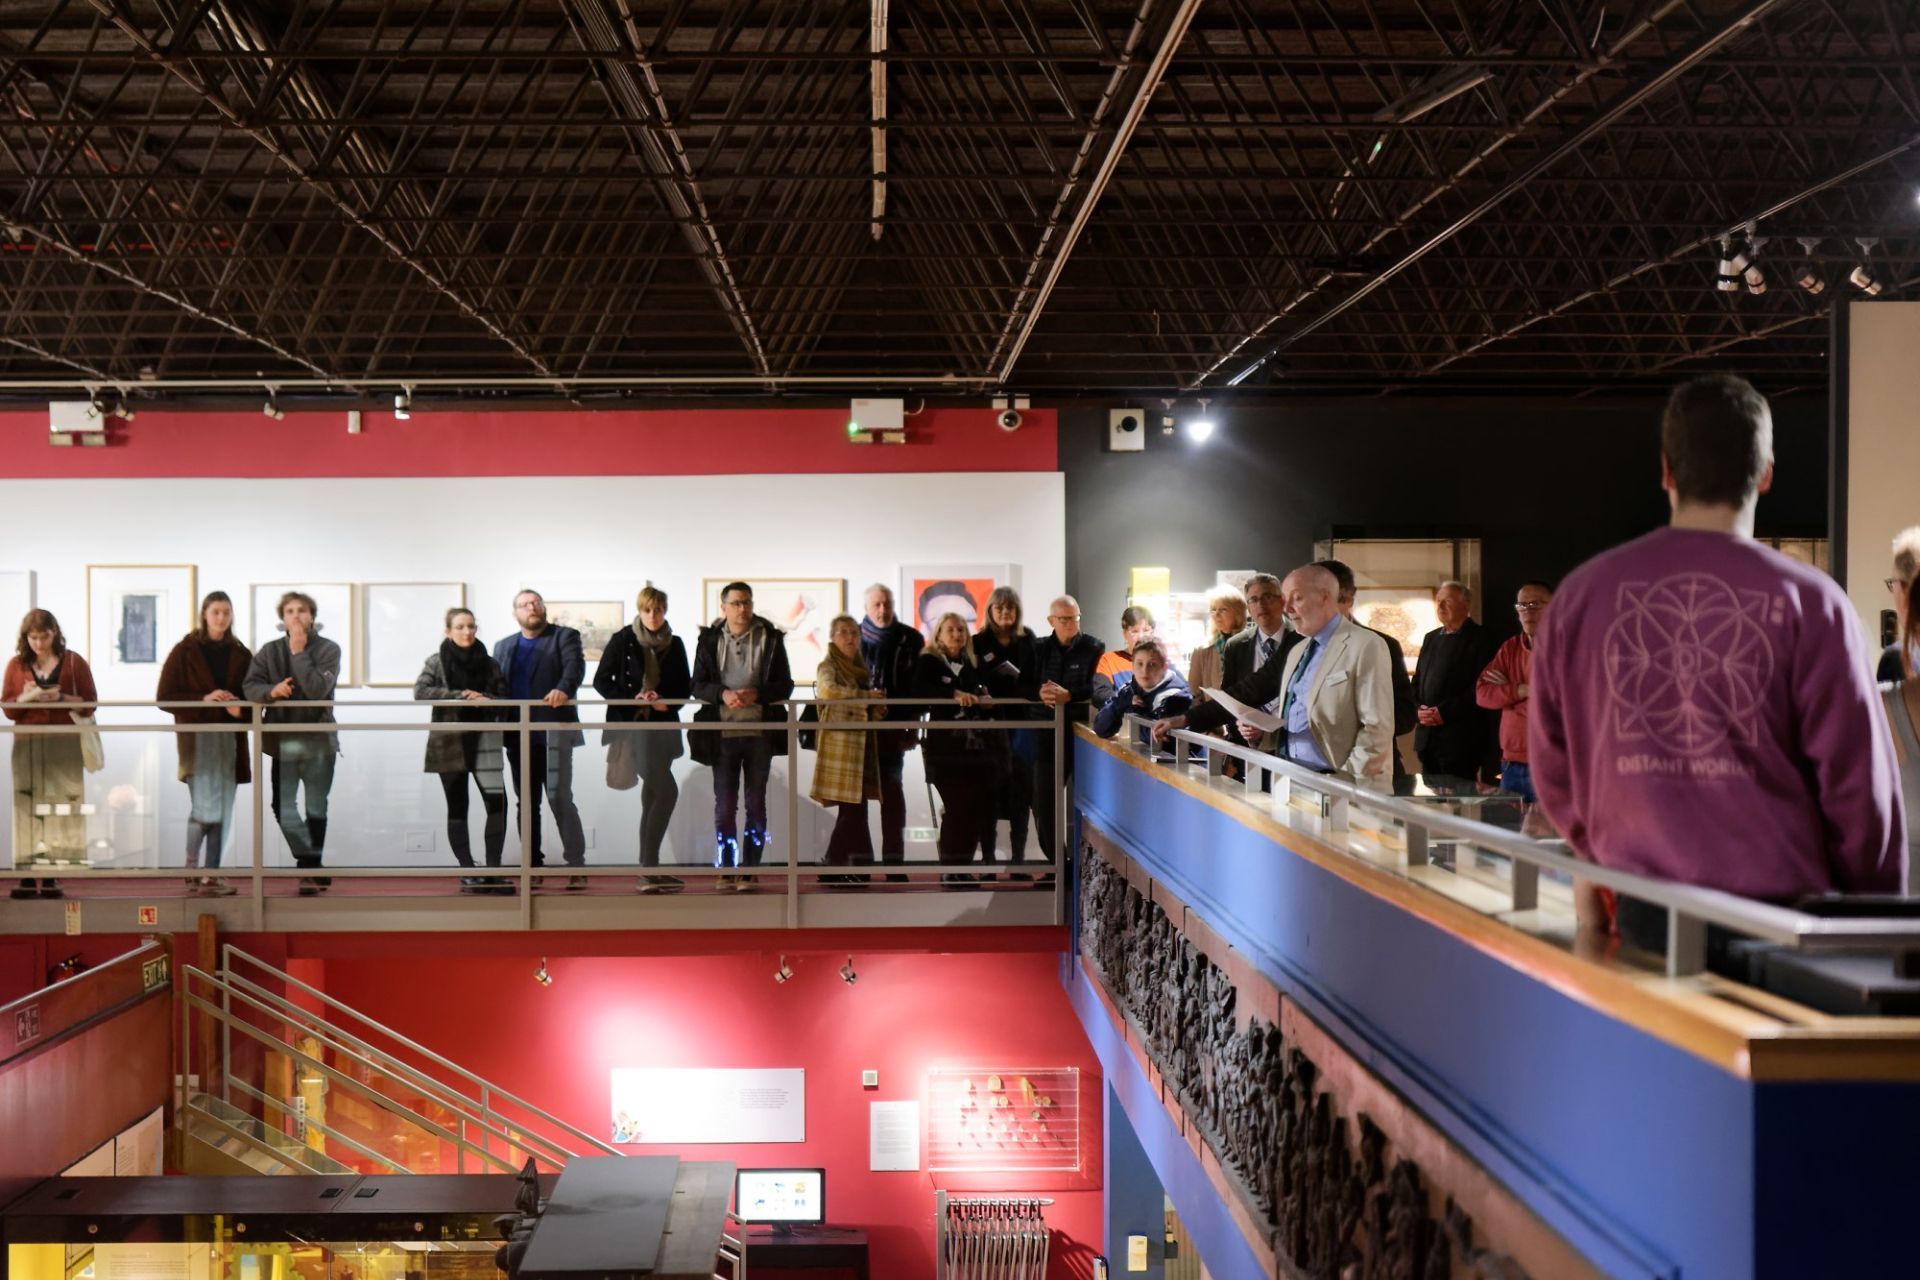 Visitors to the exhibition standing on the mezzanine while listening to a speech.